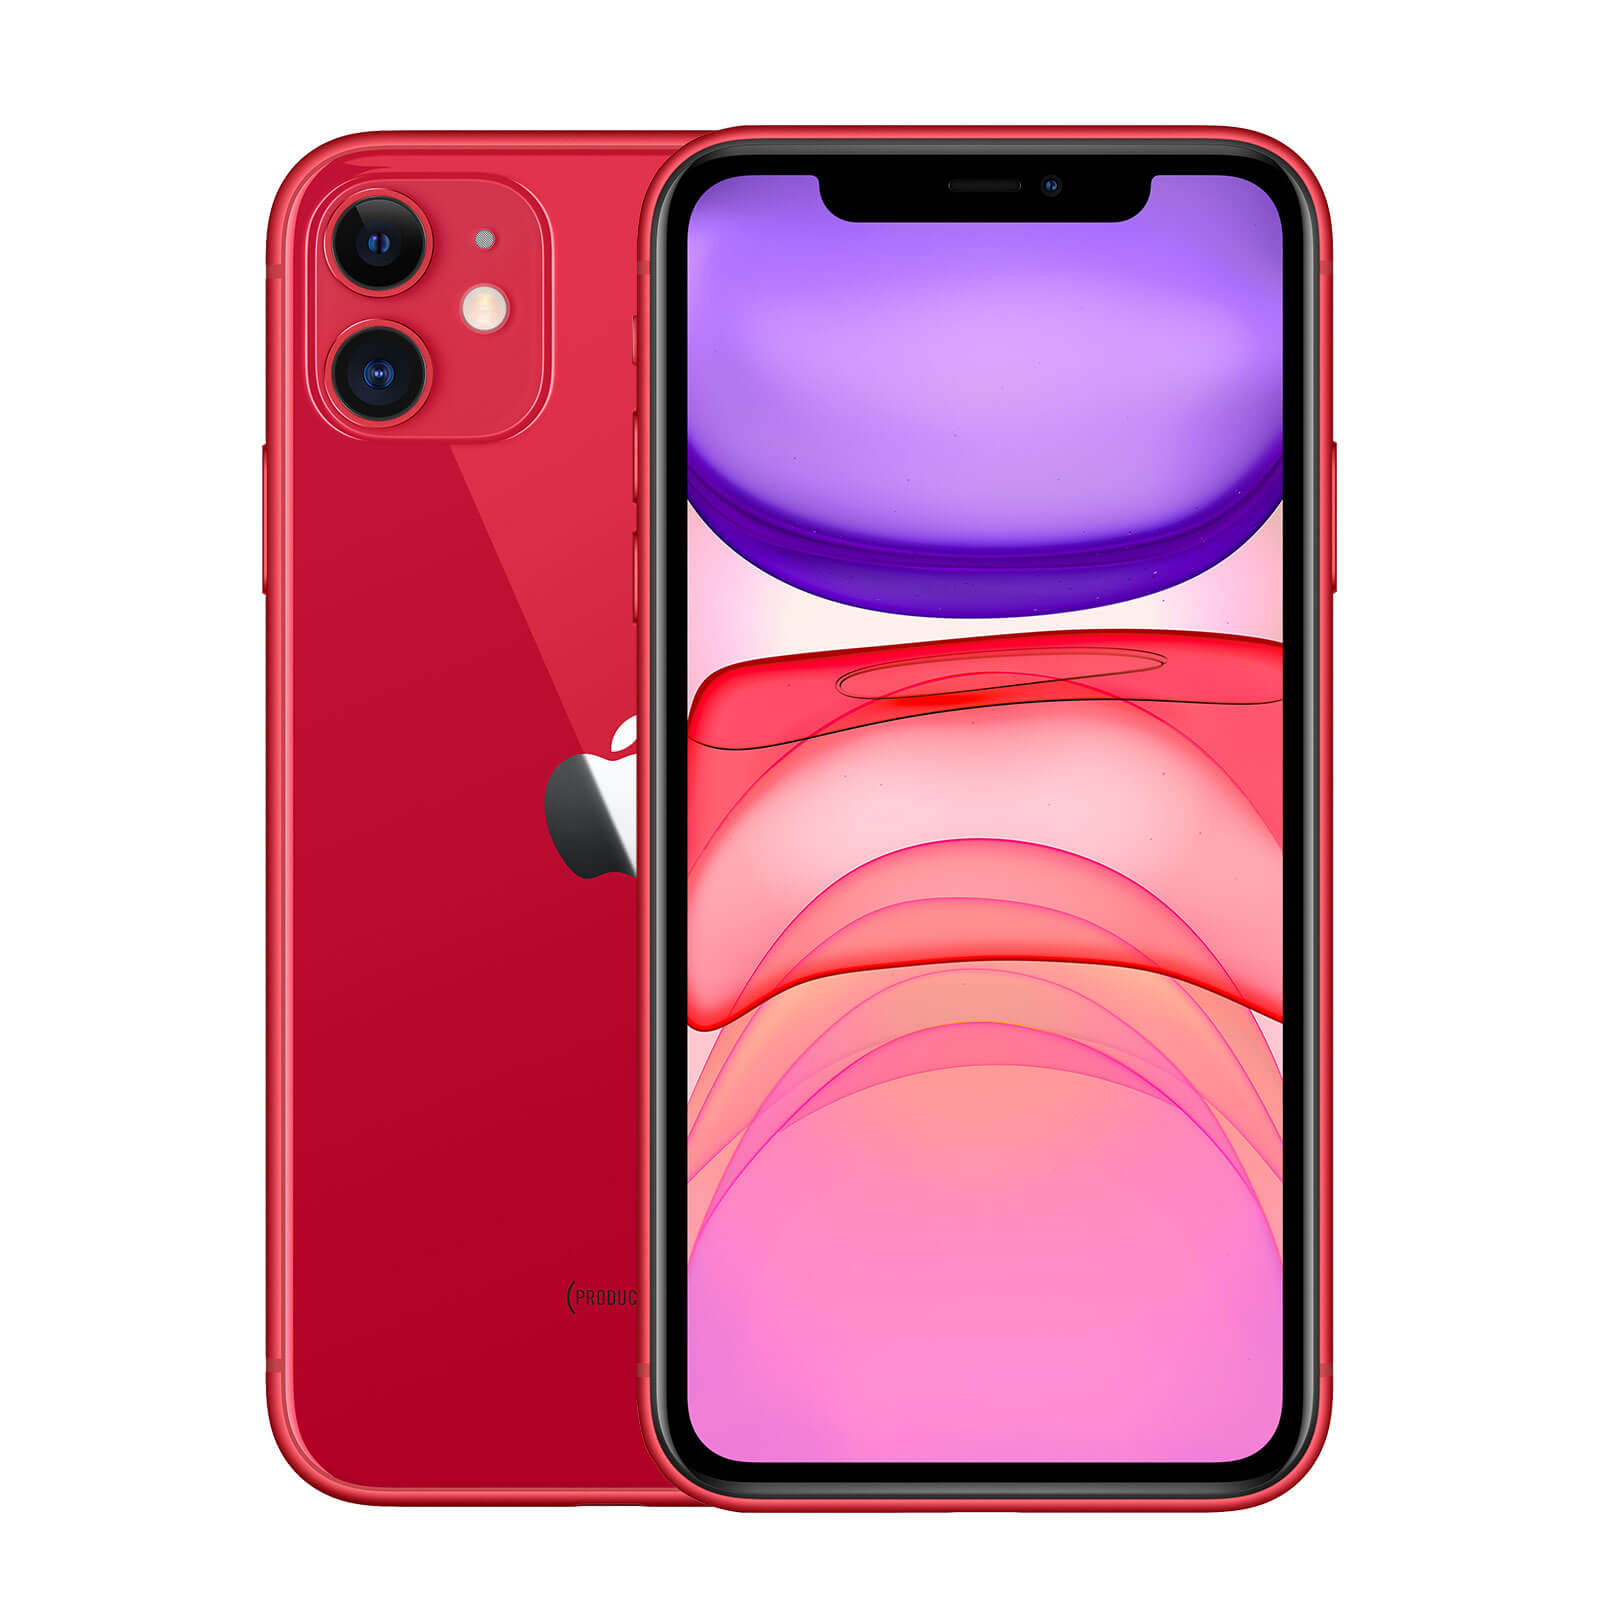 Apple iPhone 11 64GB Product Red Good - Sprint